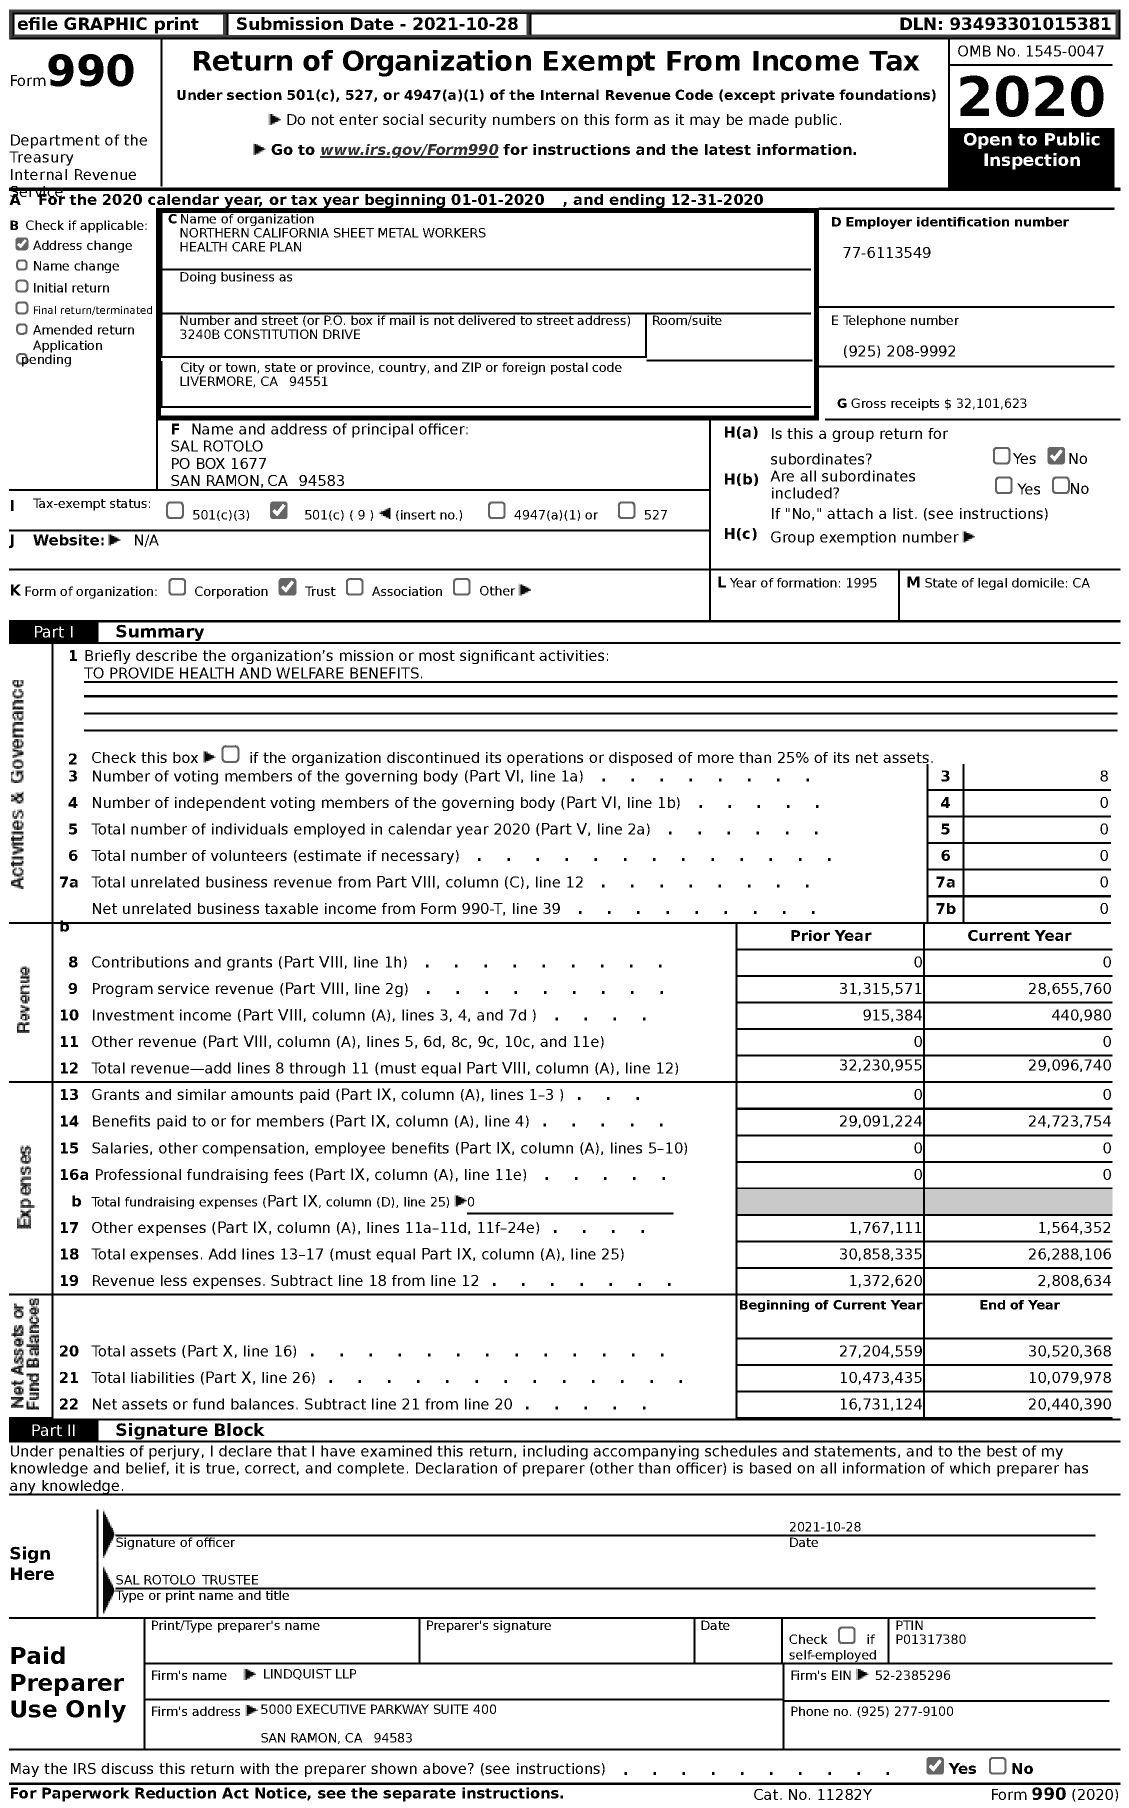 Image of first page of 2020 Form 990 for Northern California Sheet Metal Workers Health Care Plan